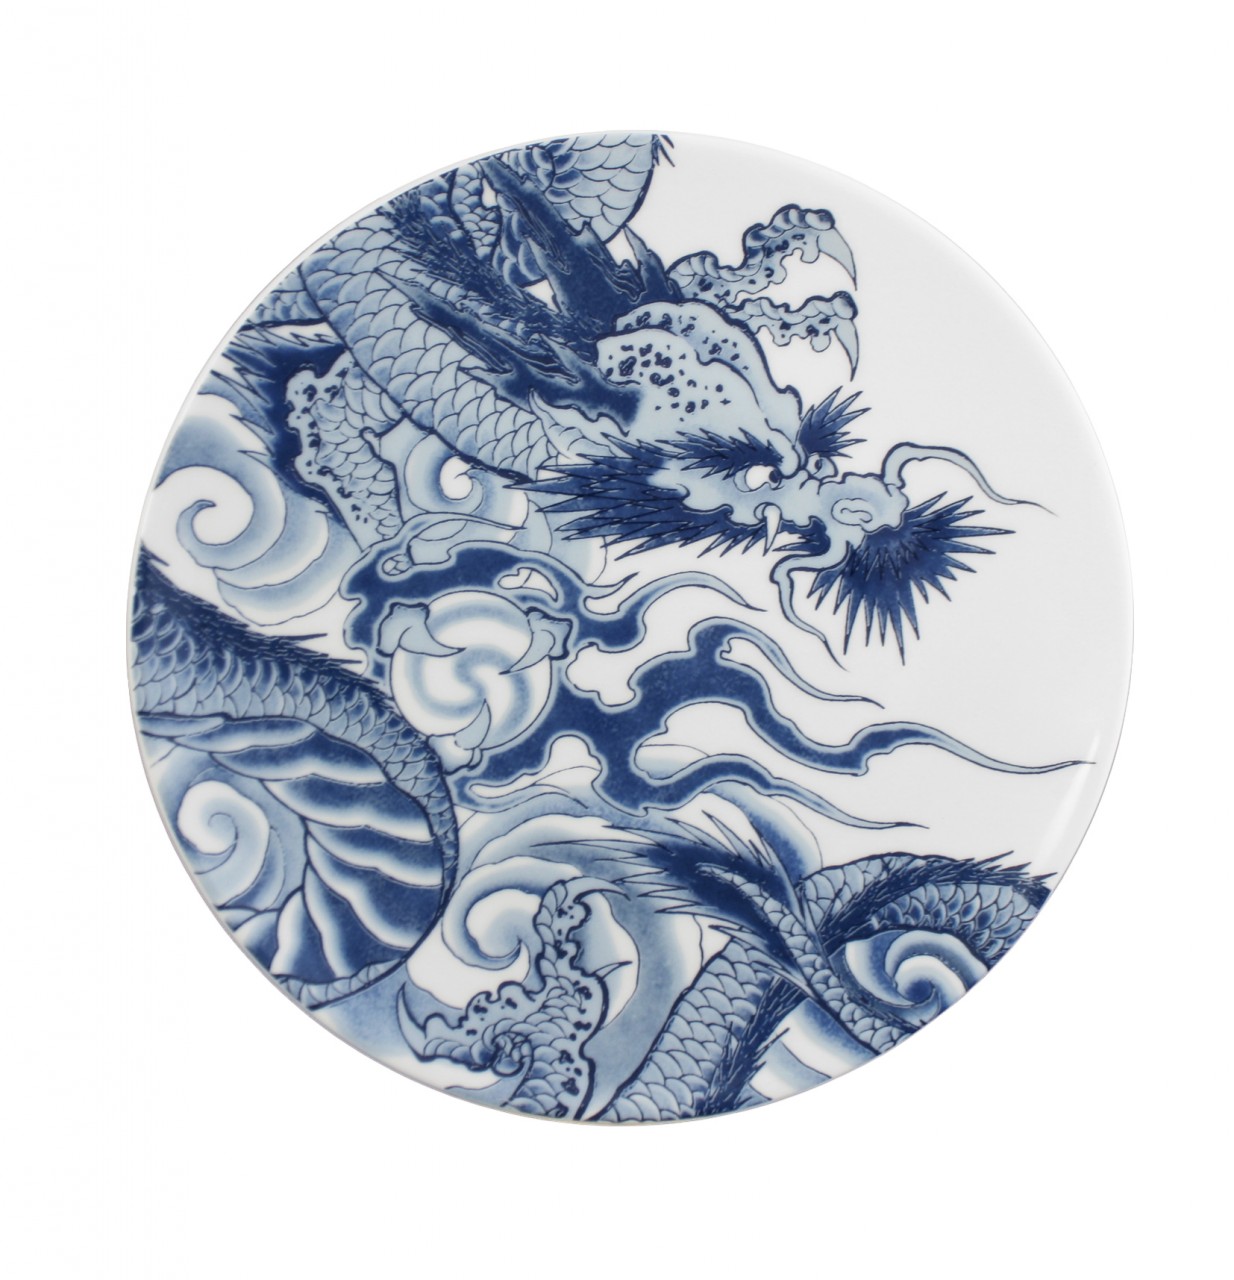 Ink Dish Irezumi Side Plate Image, Picture, Photo, Icon and Wallpaper: Ravepad place to rave about anything and everything!